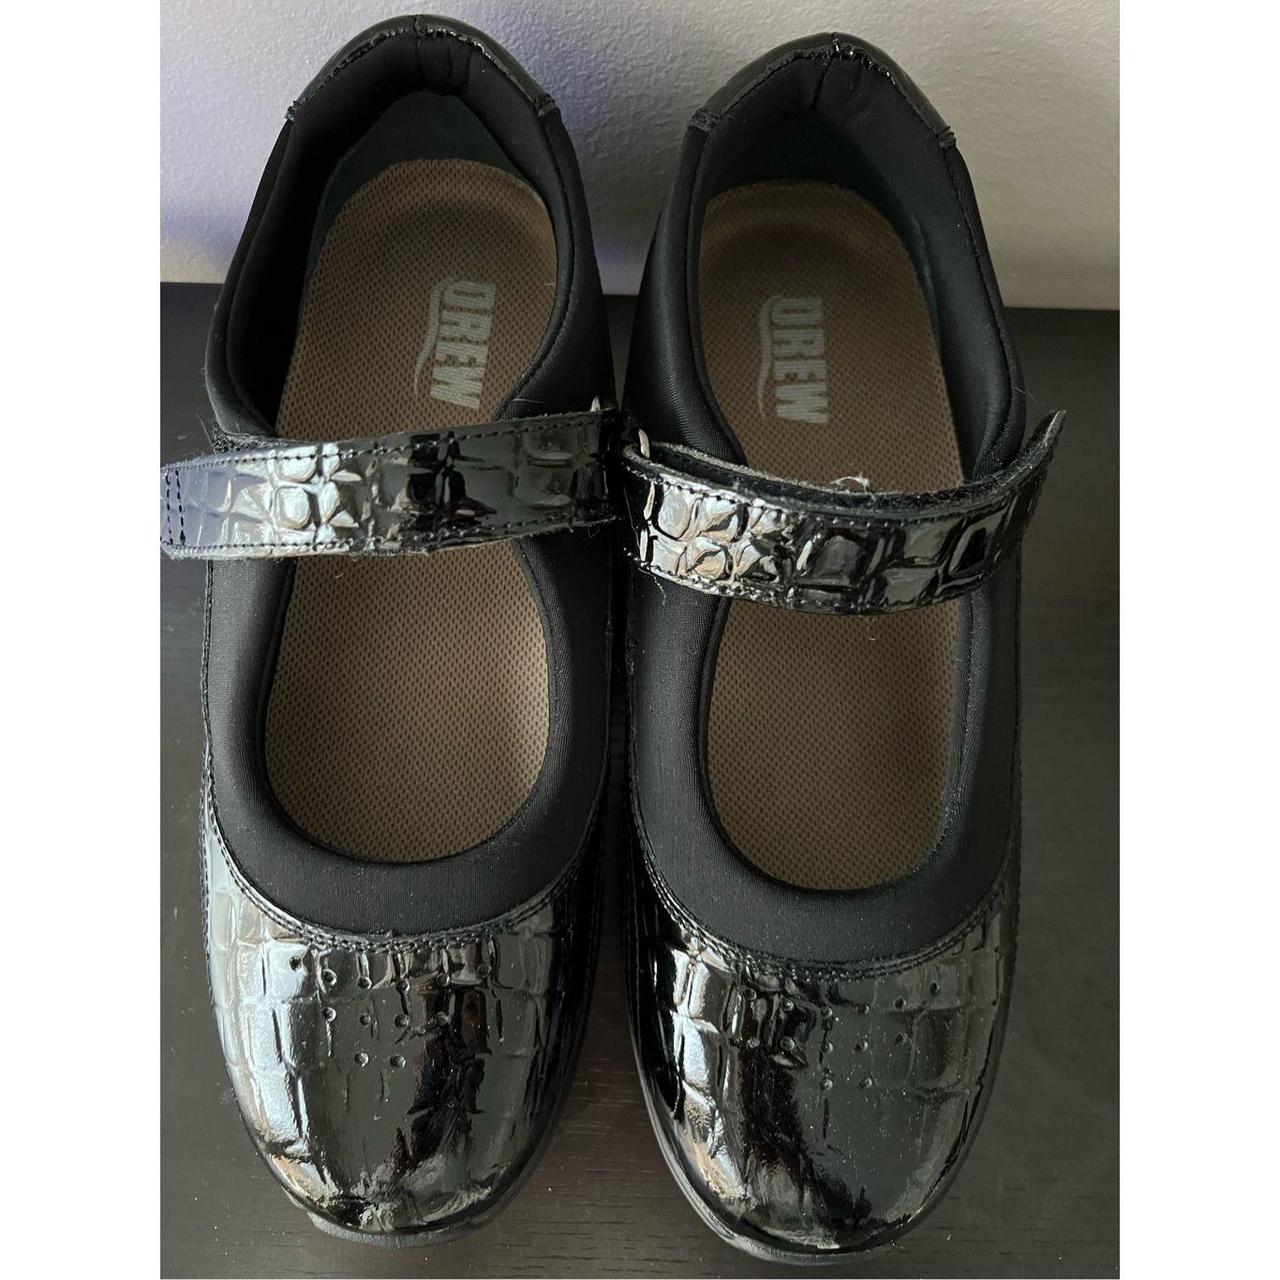 Drew patent leather with crocodile texture mary... - Depop